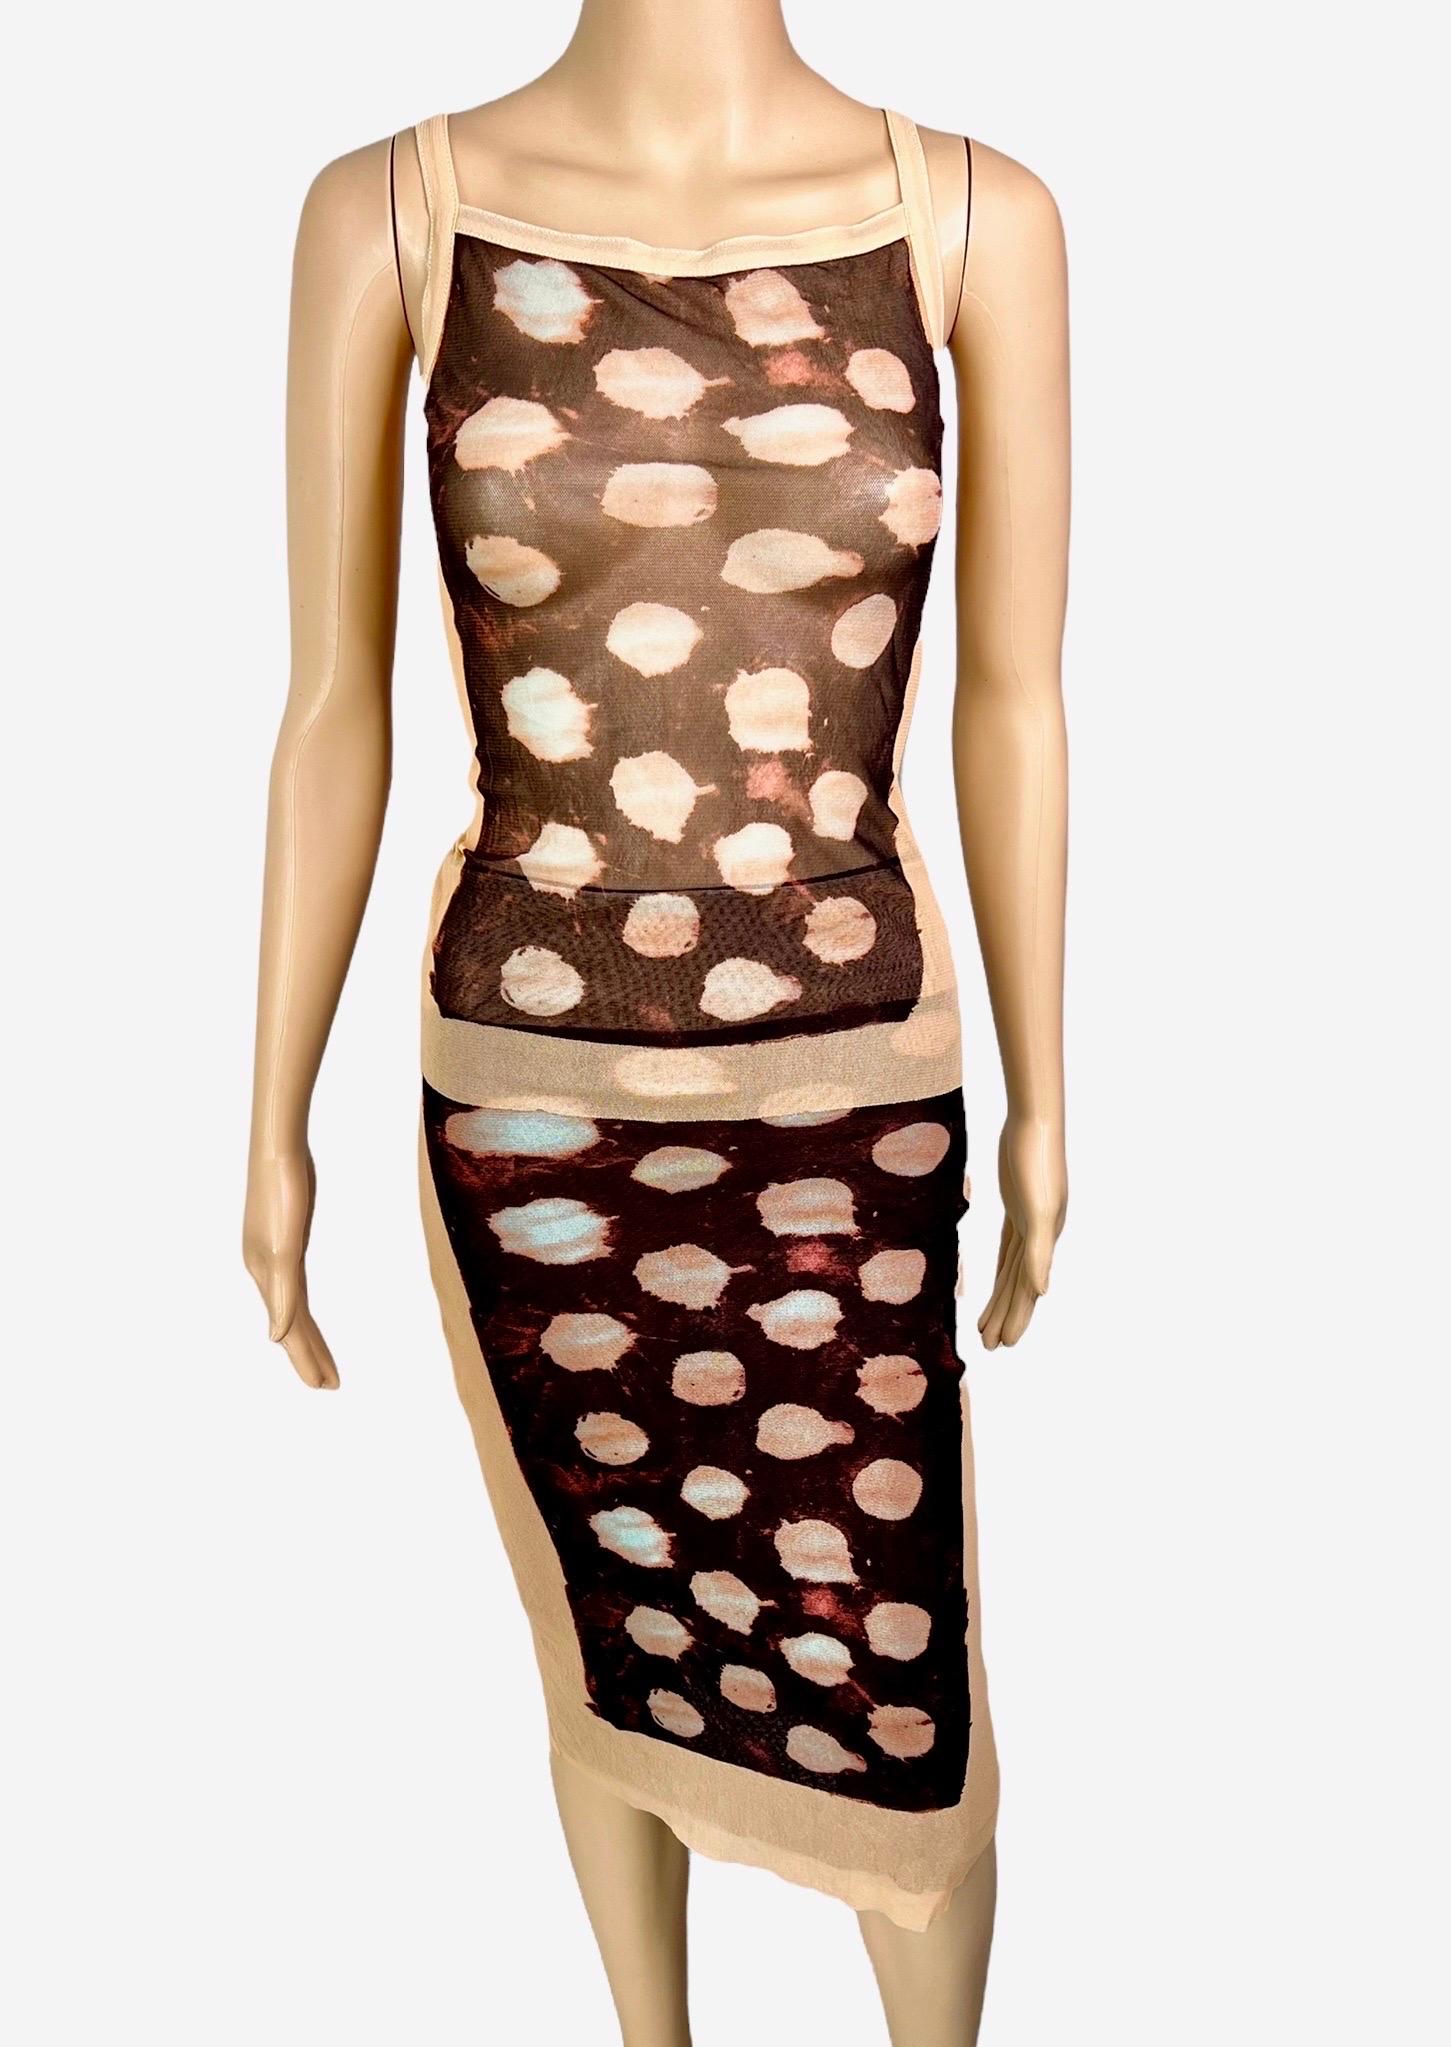 Jean Paul Gaultier S/S 2001 Sheer Mesh Abstract Polka Dot Print Cardigan, Top and Skirt 3 Piece Set

Please note the top is missing the size tag.

